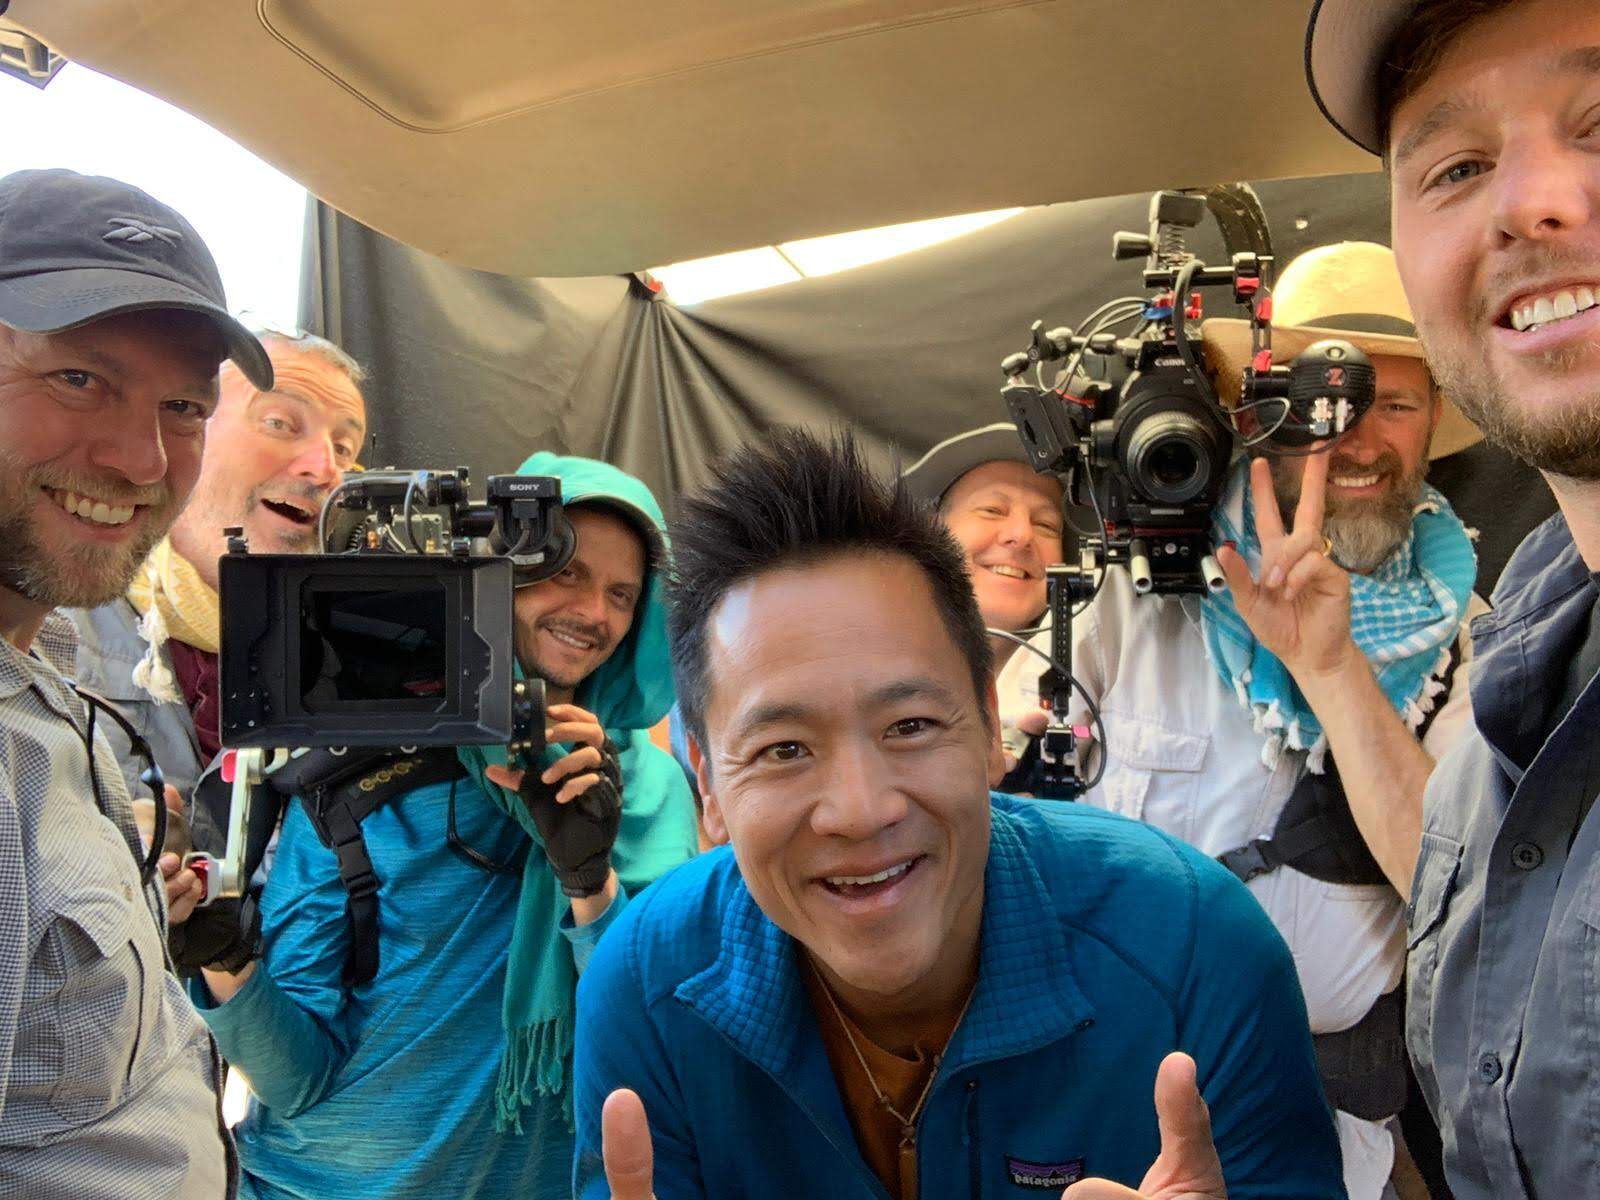 National Geographic Explorer Albert Lin uses knowledge as his